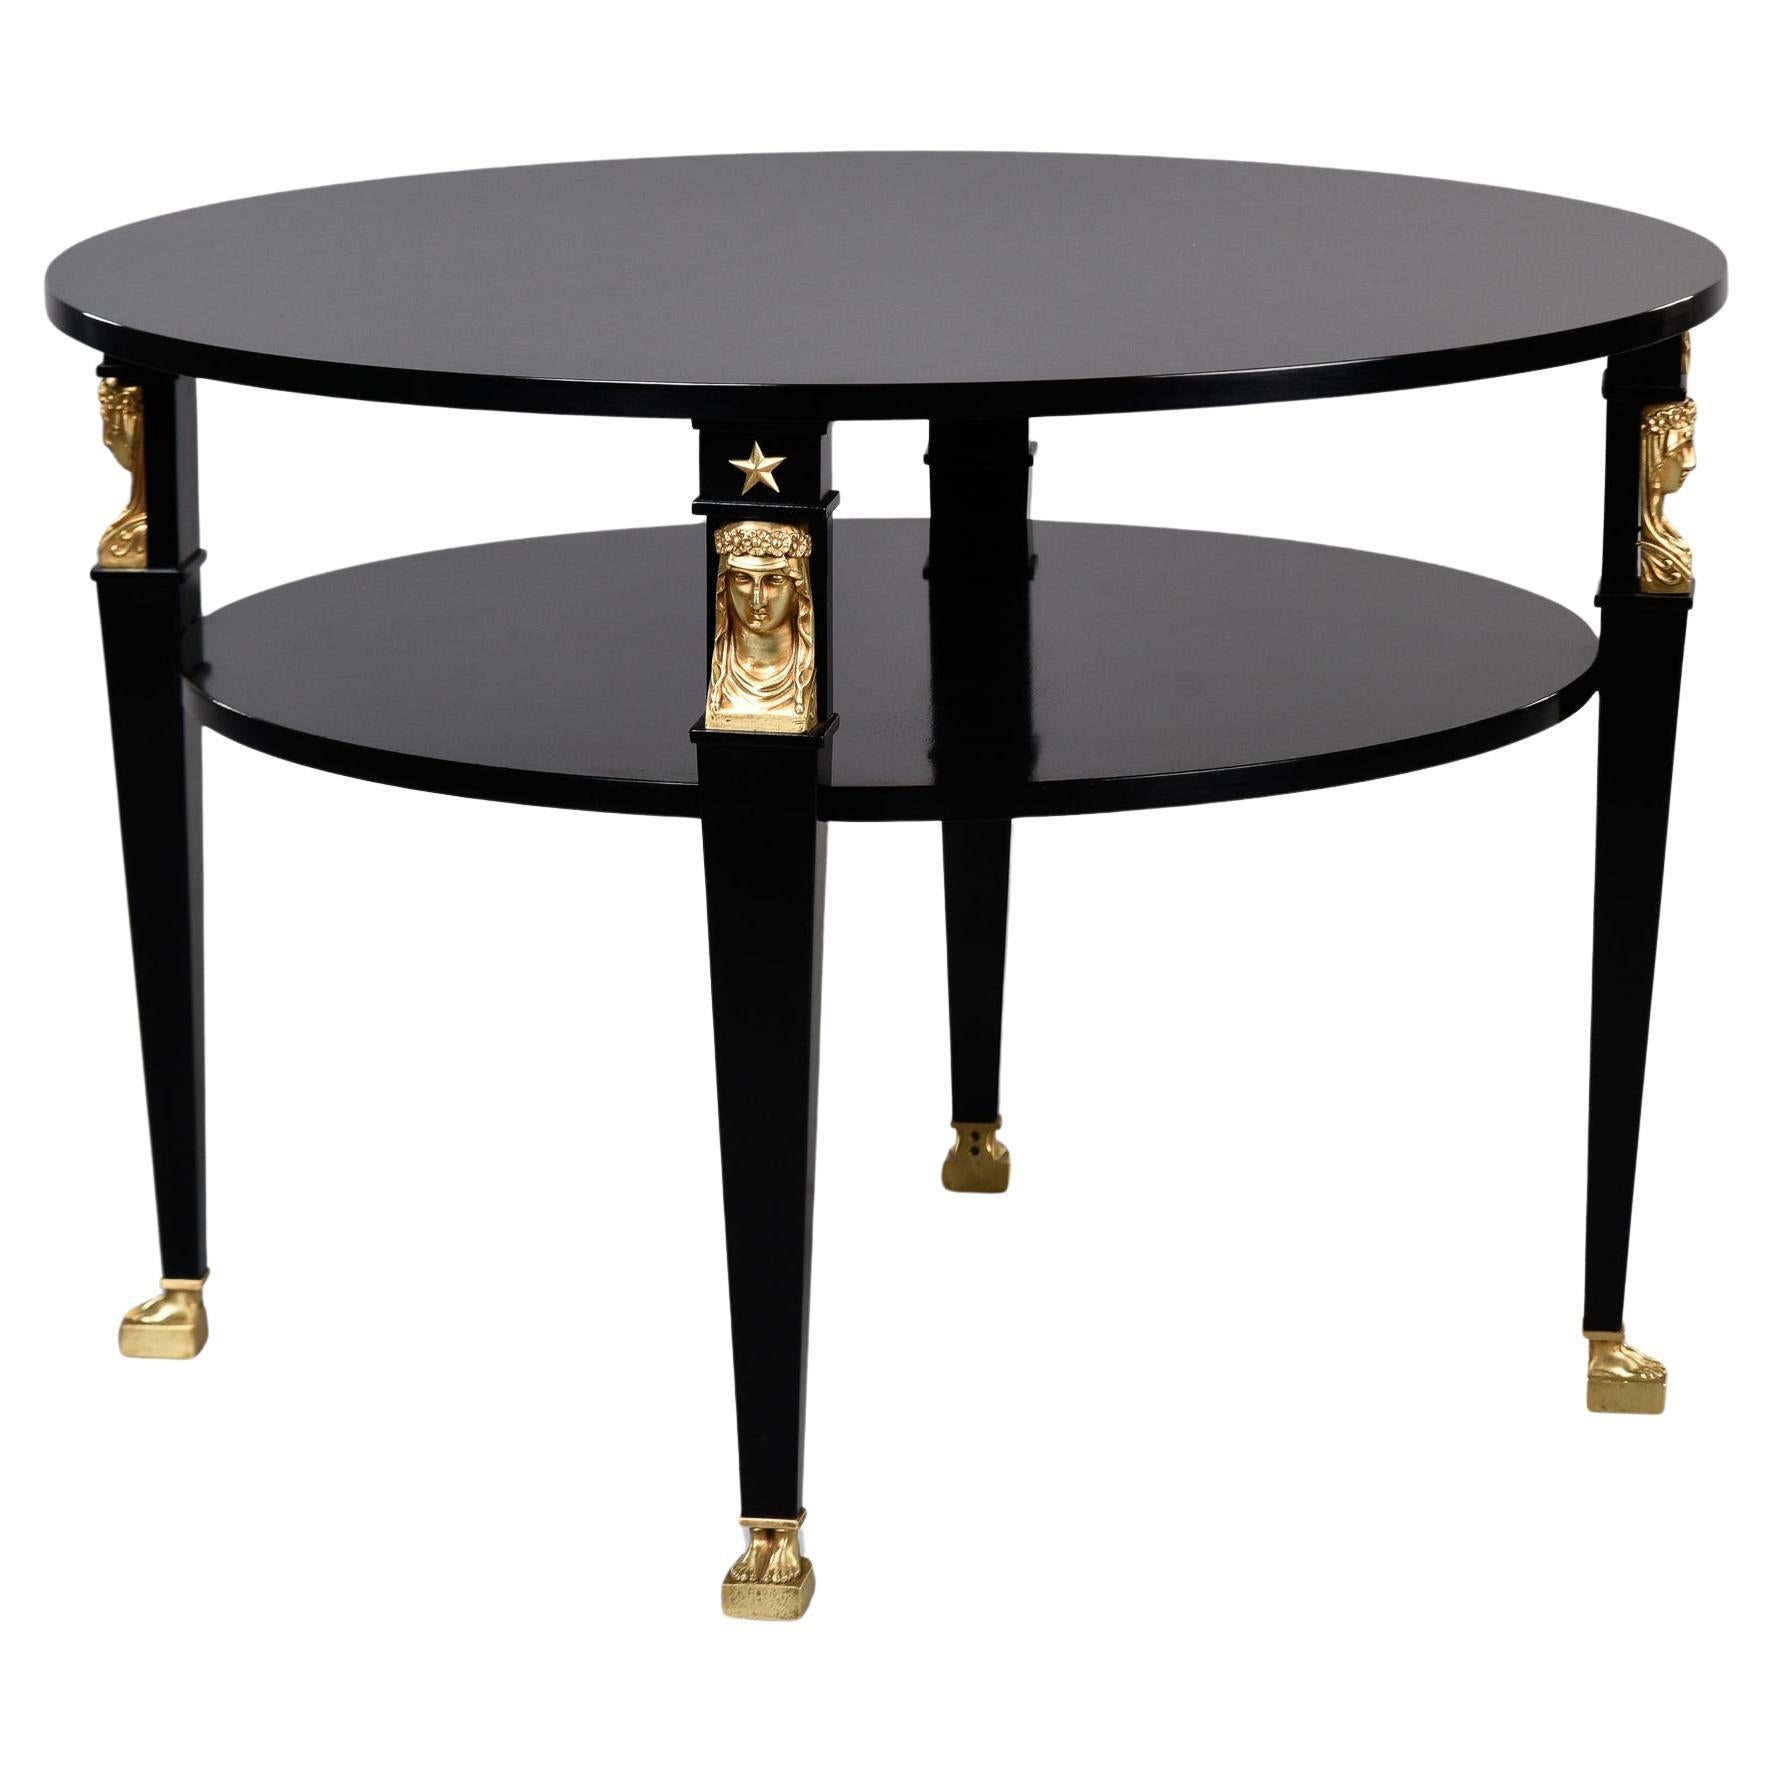 19th C Empire Ebonised Round Table with Brass Figural Mounts